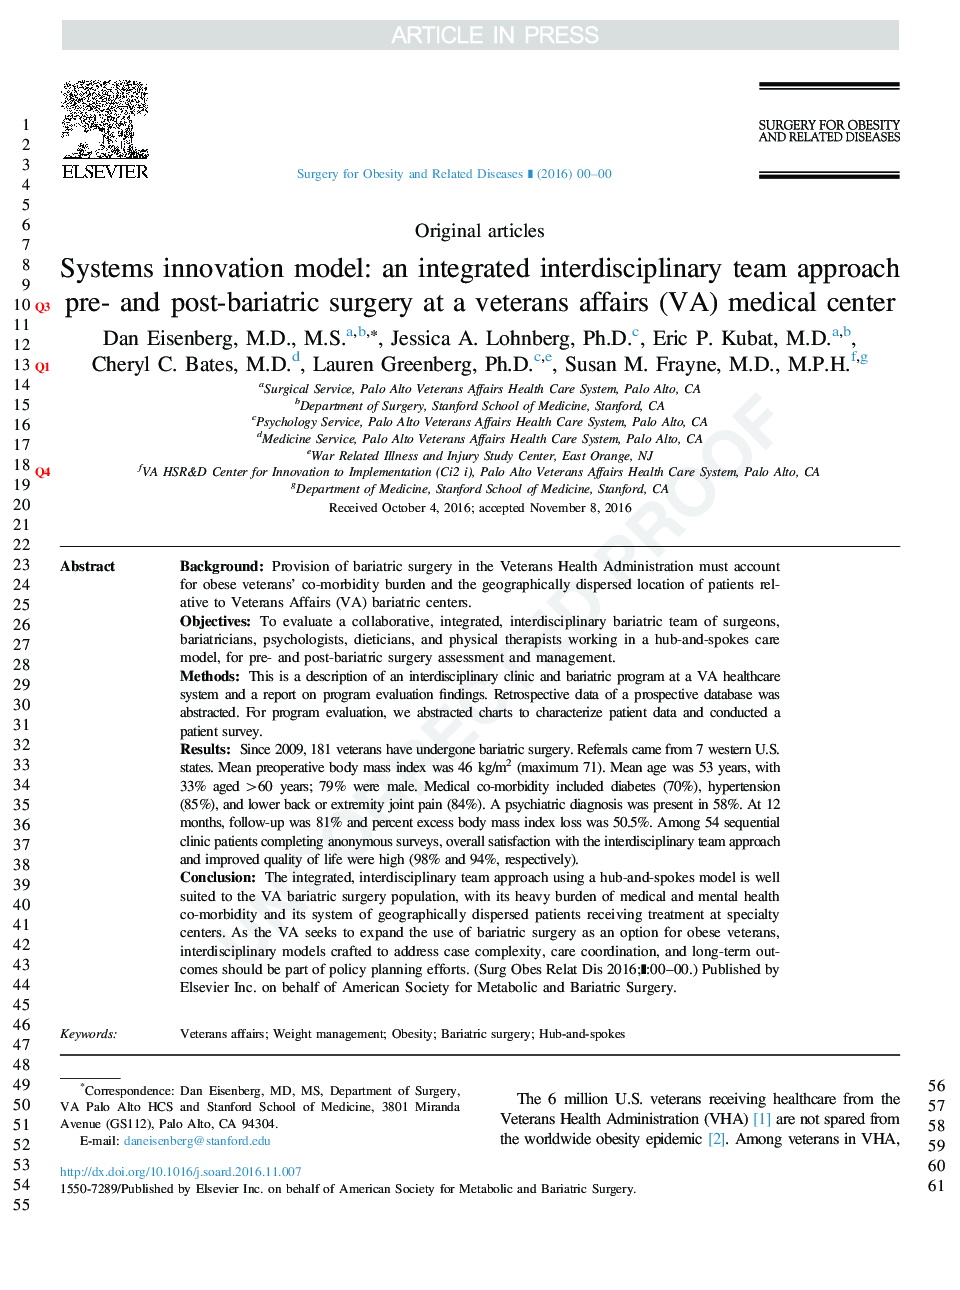 Systems innovation model: an integrated interdisciplinary team approach pre- and post-bariatric surgery at a veterans affairs (VA) medical center